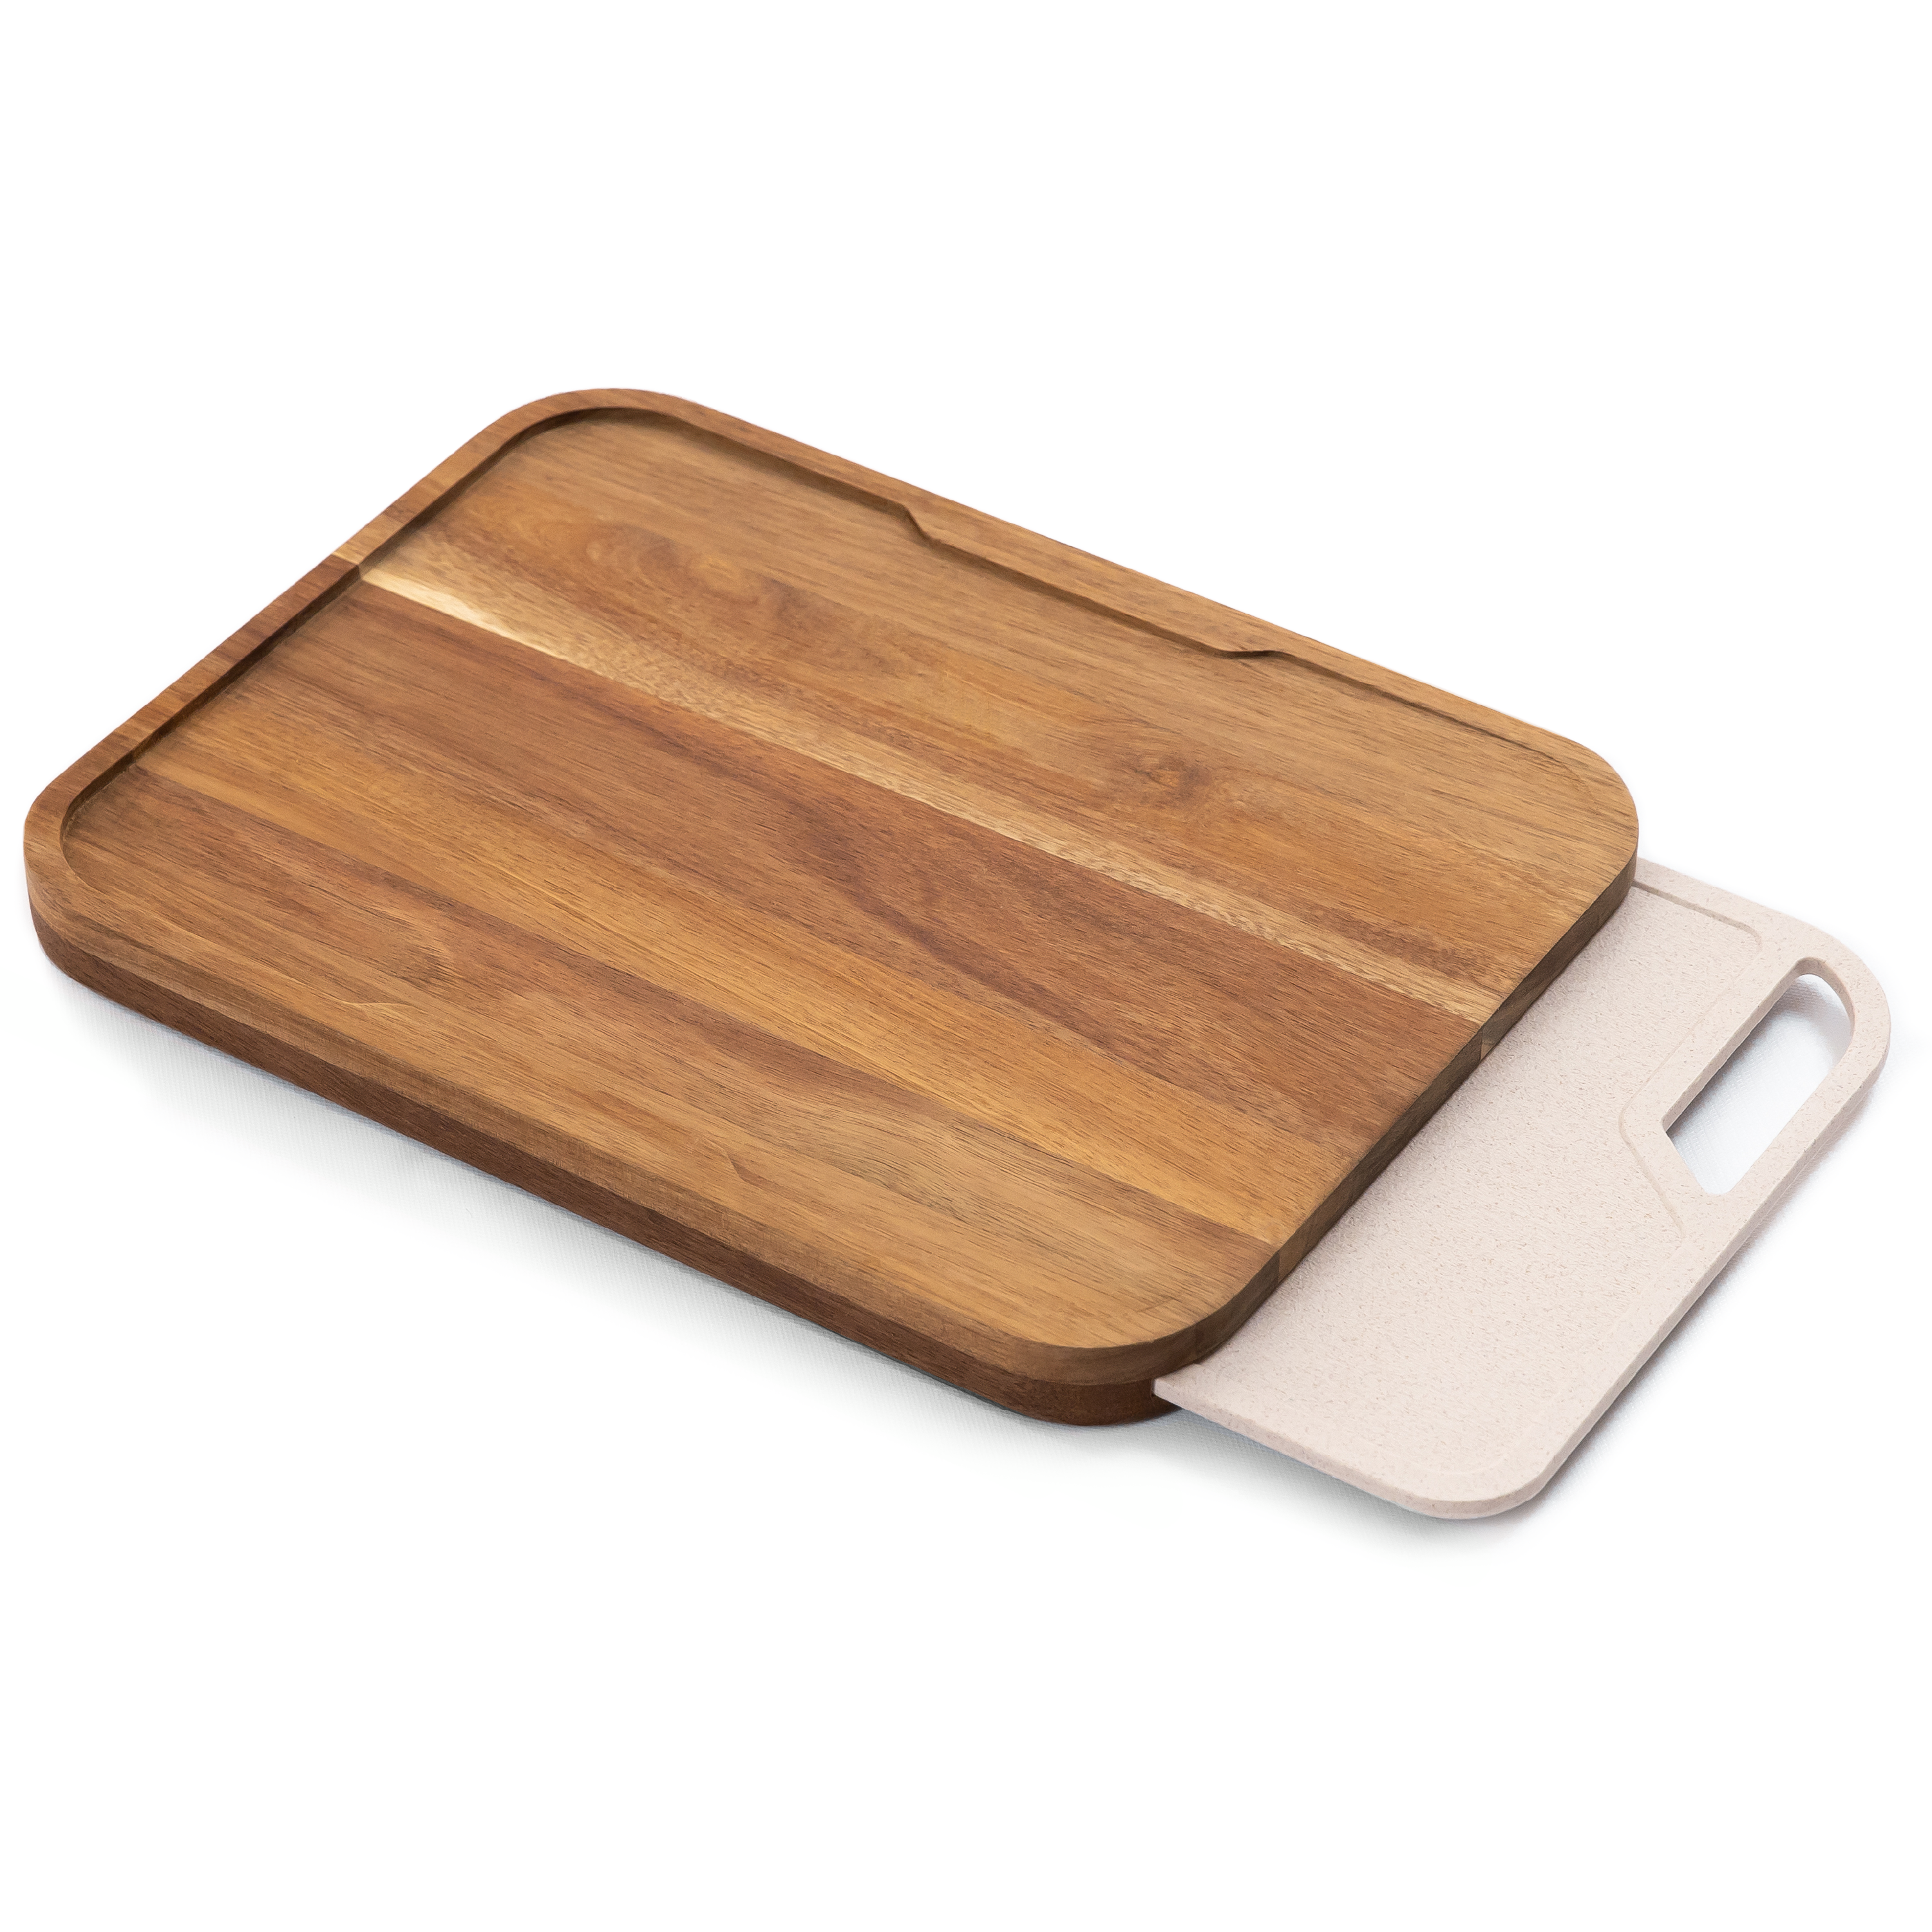 Kristie's Kitchen Cutting Board with Containers - Organic Acacia Wood  Cutting Boards for Kitchen - Chopping Board - Butcher Block with White